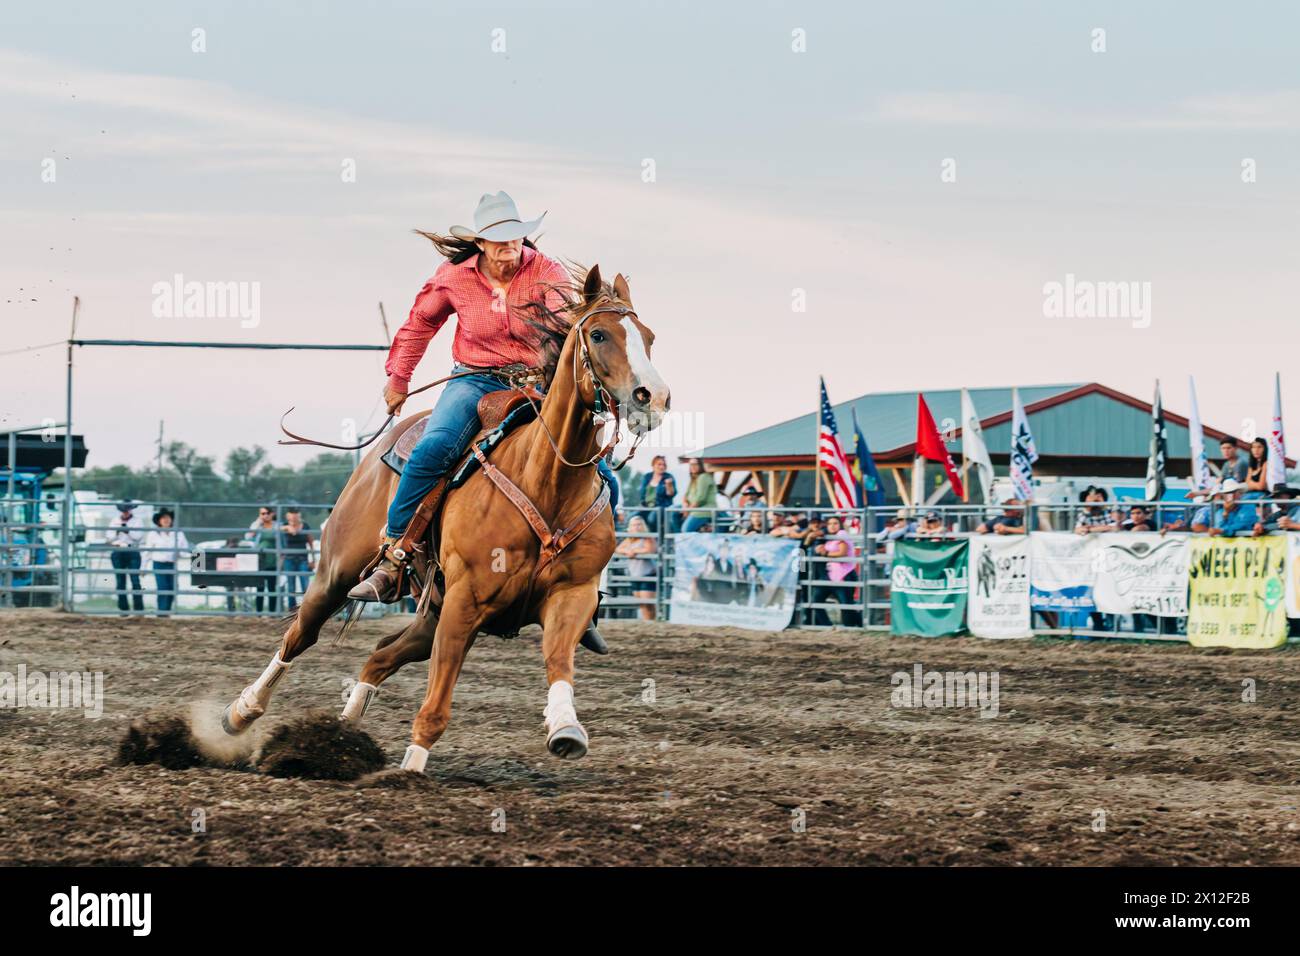 Cowgirl riding on horse at county fair rodeo Stock Photo